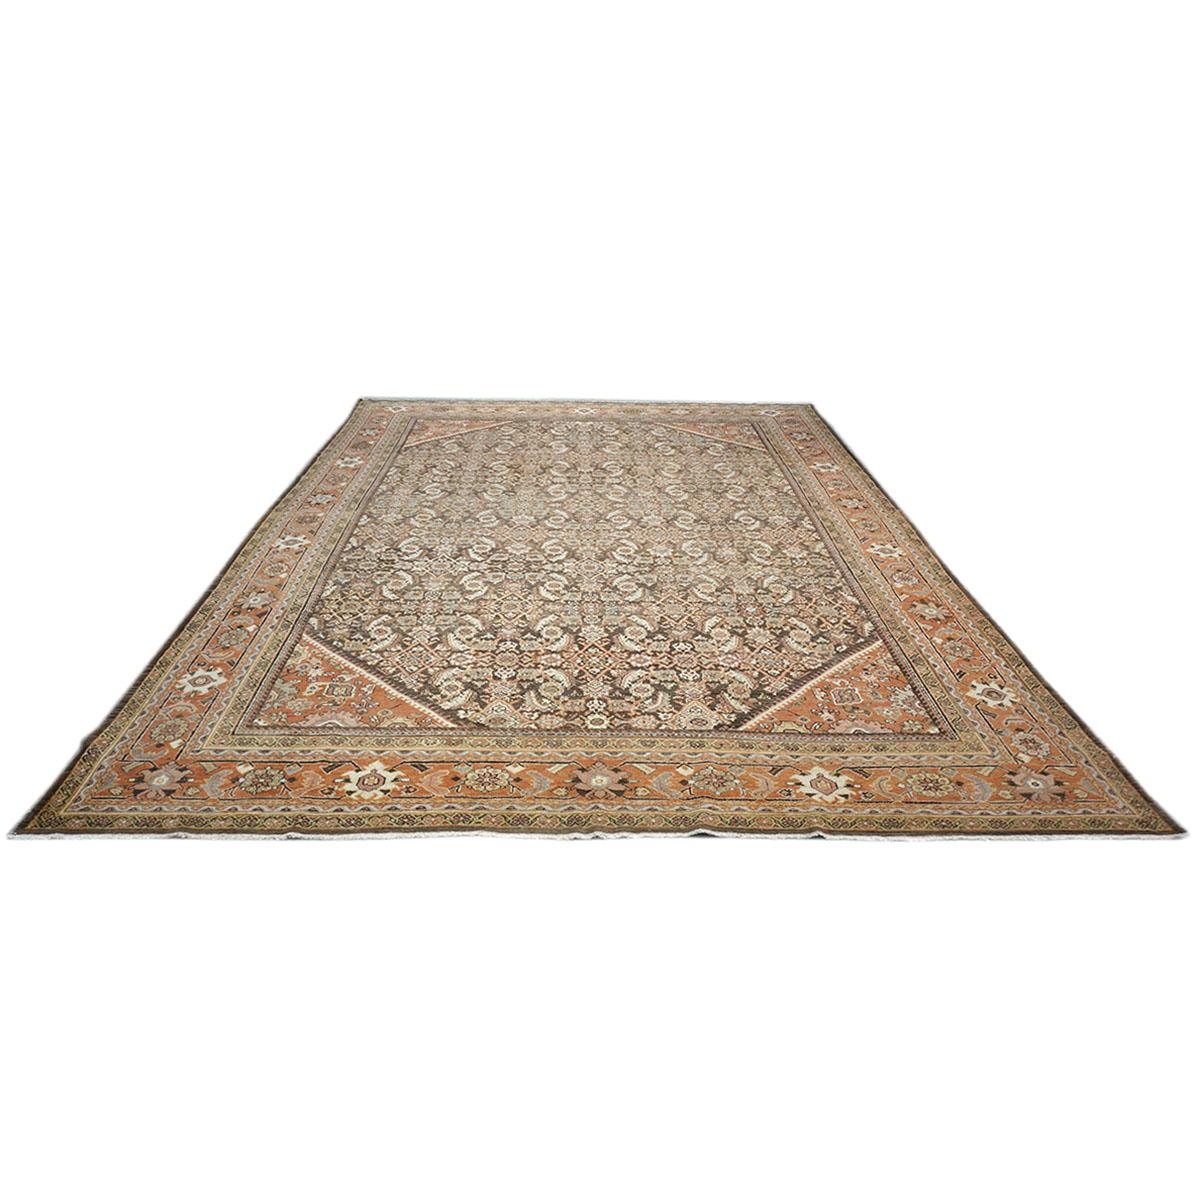 Early 20th Century 20th Century Antique Persian Sultanabad 10x14 Brown & Rust Handmade Area Rug For Sale